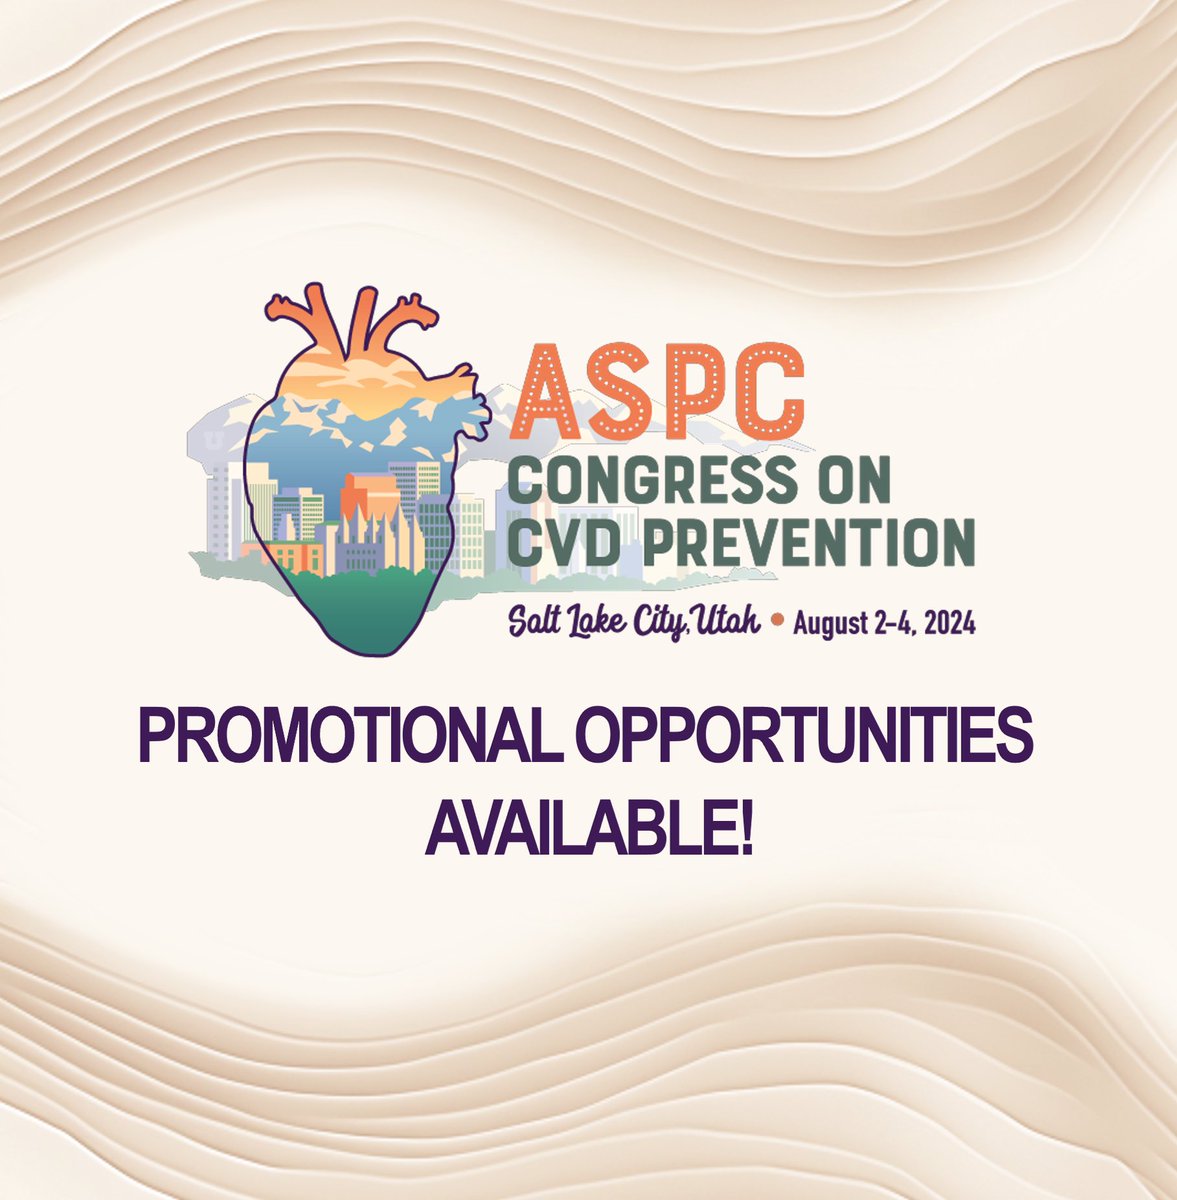 Promotional Opportunities are still available for Corporate Partners at #ASPC2024 | Salt Lake City | Aug 2-4! Visit aspconline.org/2024Congress to check out ways to Exhibit or Showcase your advancements in the prevention of CVD to 300+ clinicians. @drmarthagulati @drmichaelshapir